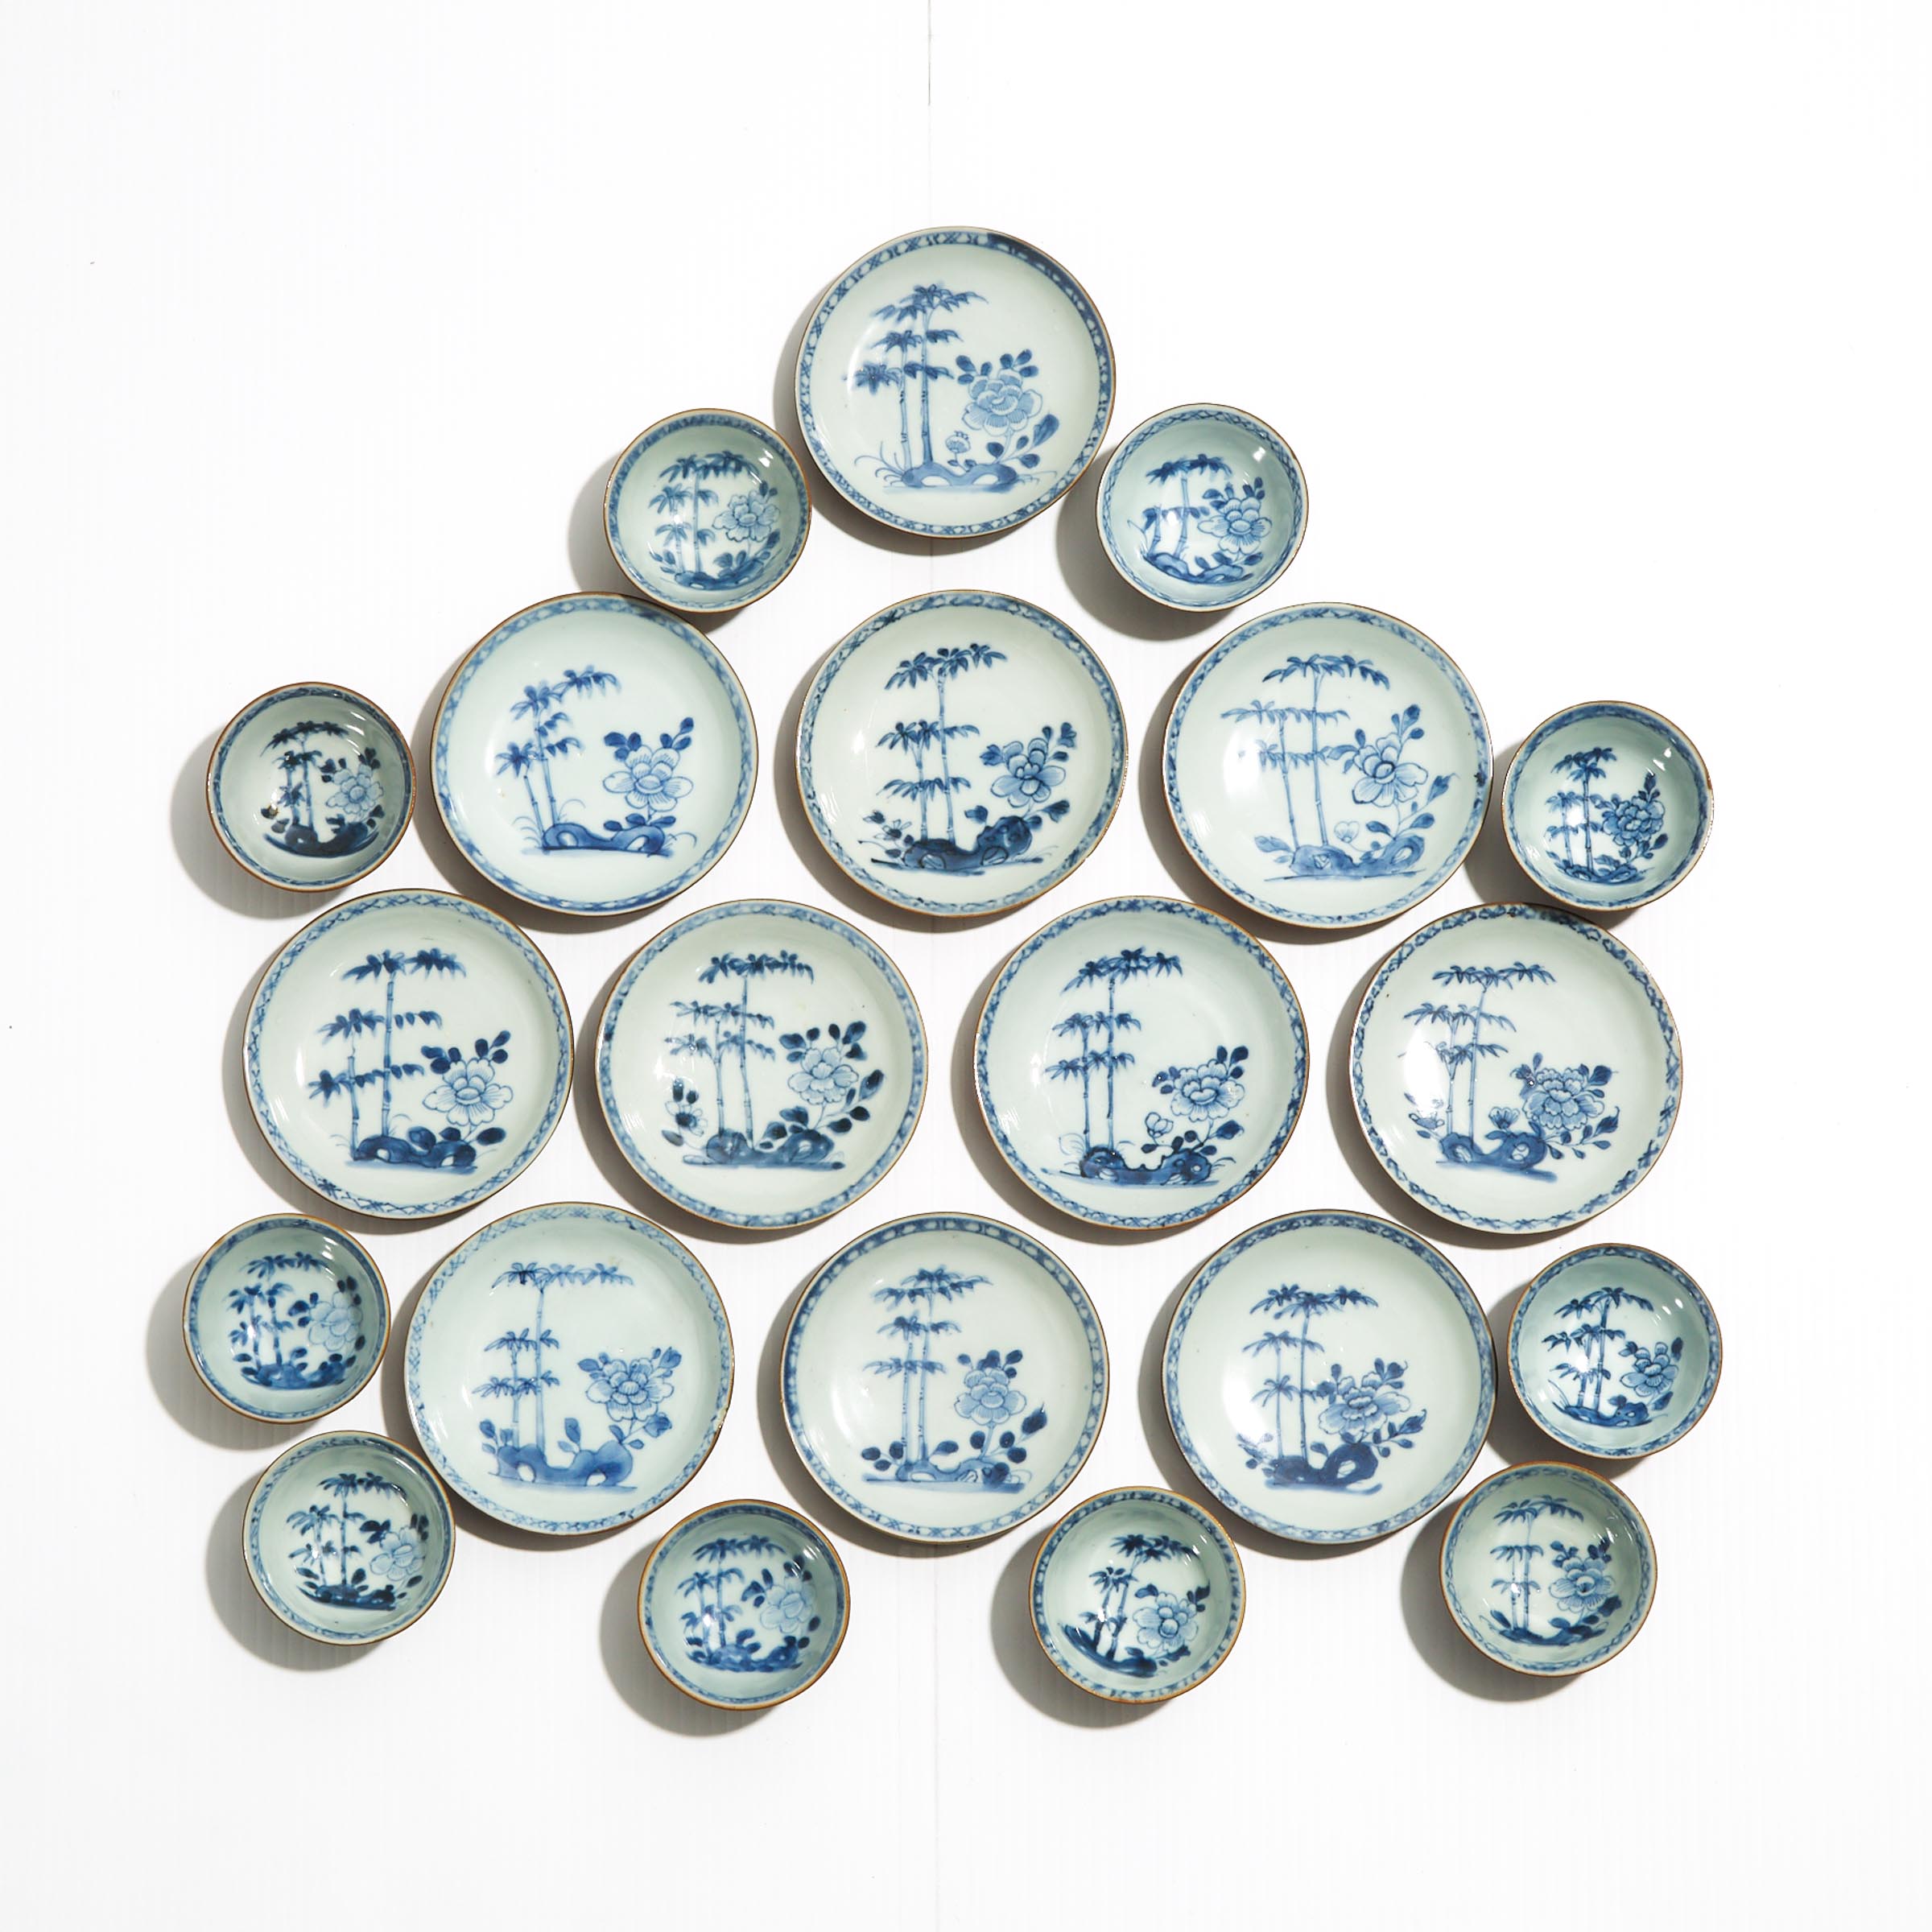 A Set of Twenty-One 'Batavian Bamboo and Peony' Pattern Teabowls and Saucers from the Nanking Cargo, Qianlong Period, Circa 1750